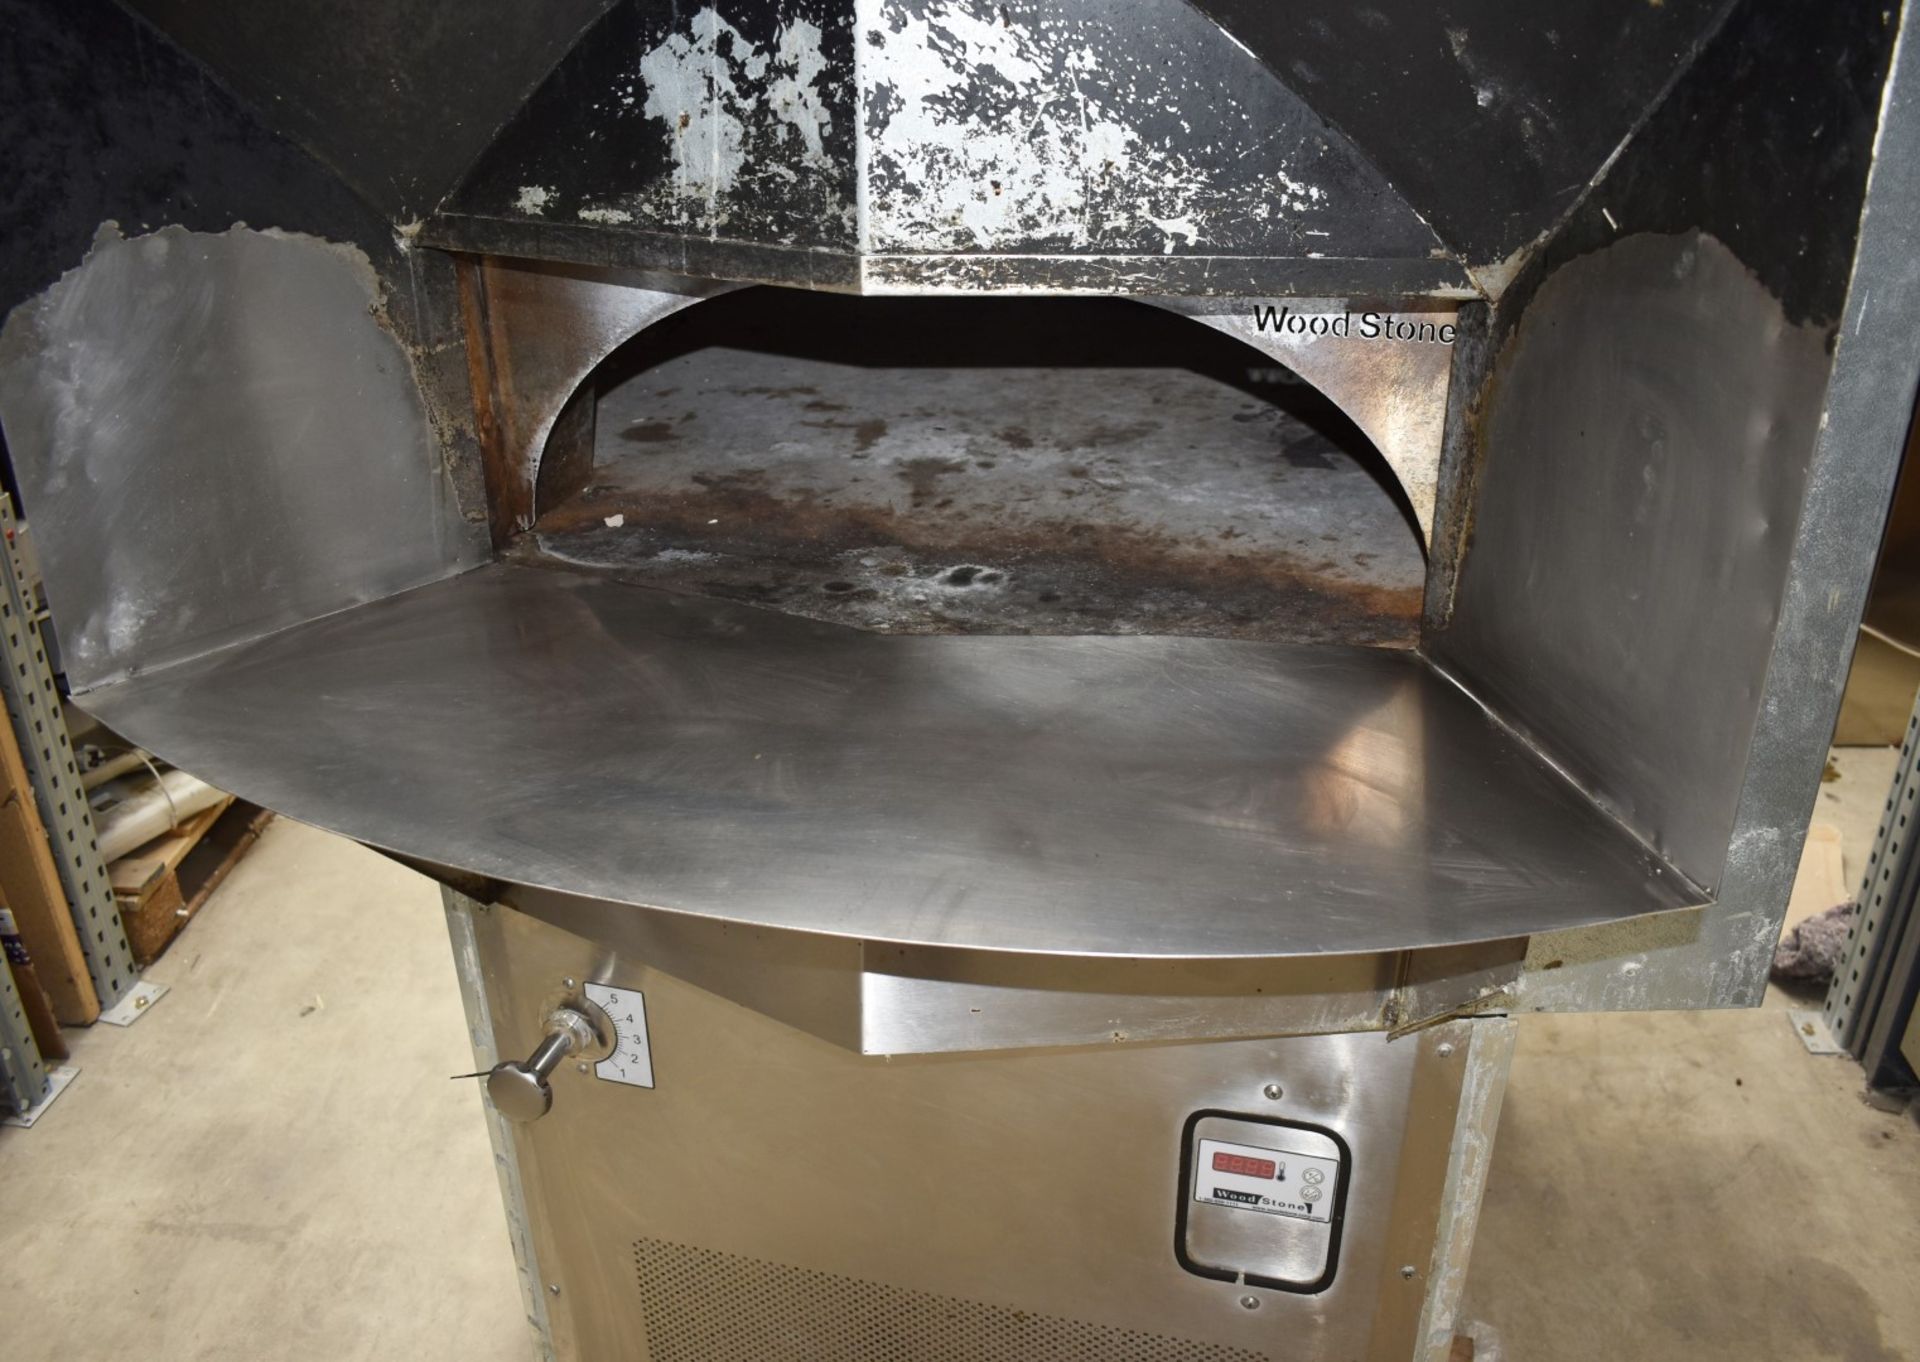 1 x Woodstone Mountain Series Commercial Gas Fired Pizza Oven - Approx RRP £25,000 - Image 18 of 25